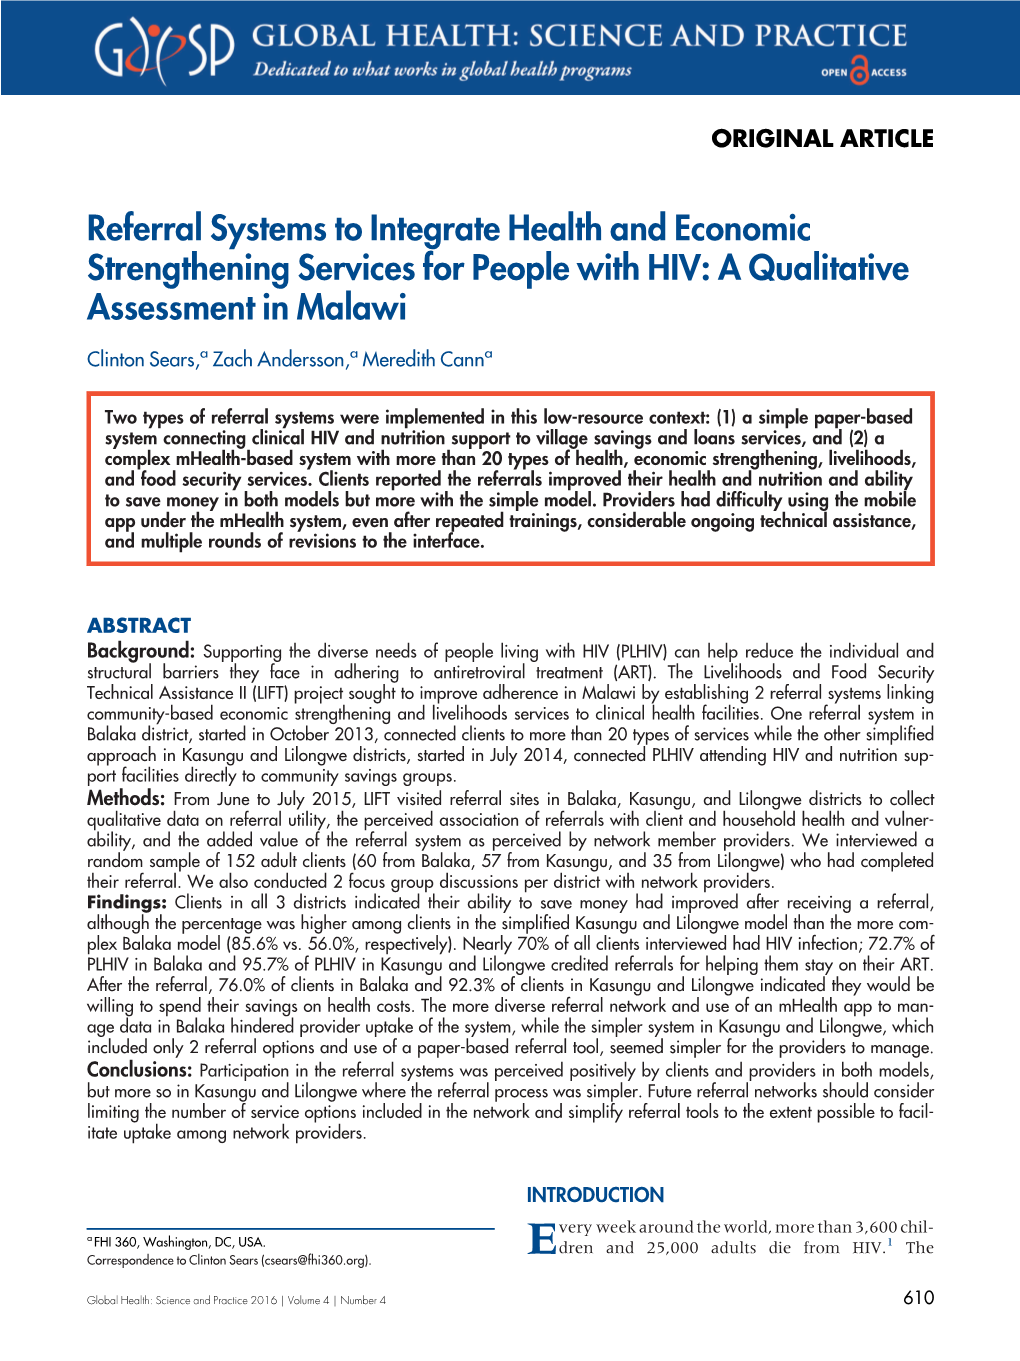 Referral Systems to Integrate Health and Economic Strengthening Services for People with HIV: a Qualitative Assessment in Malawi